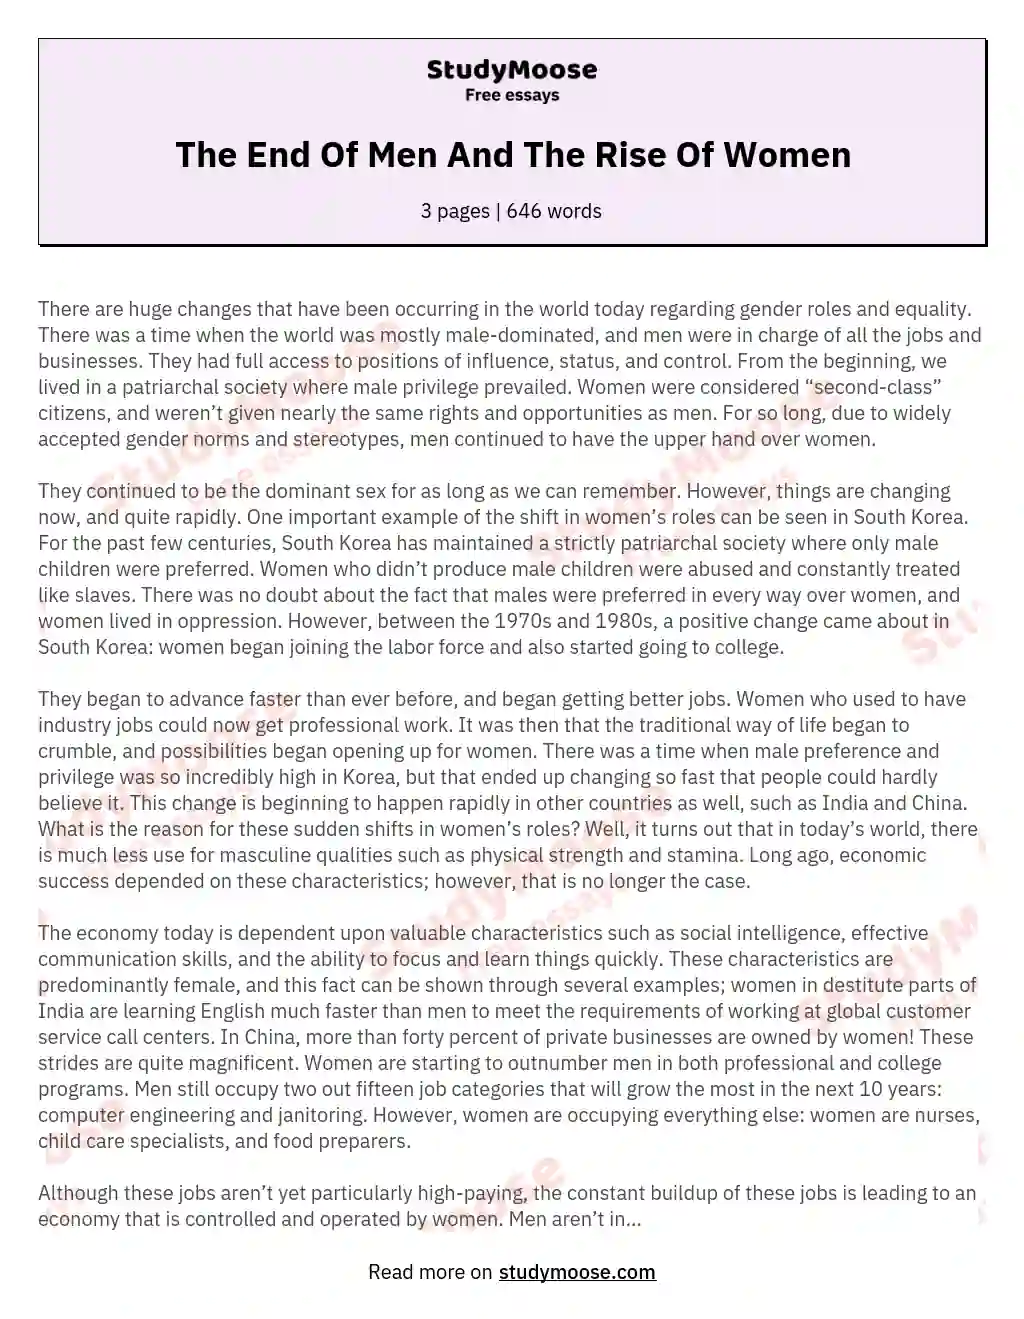 The End Of Men And The Rise Of Women essay